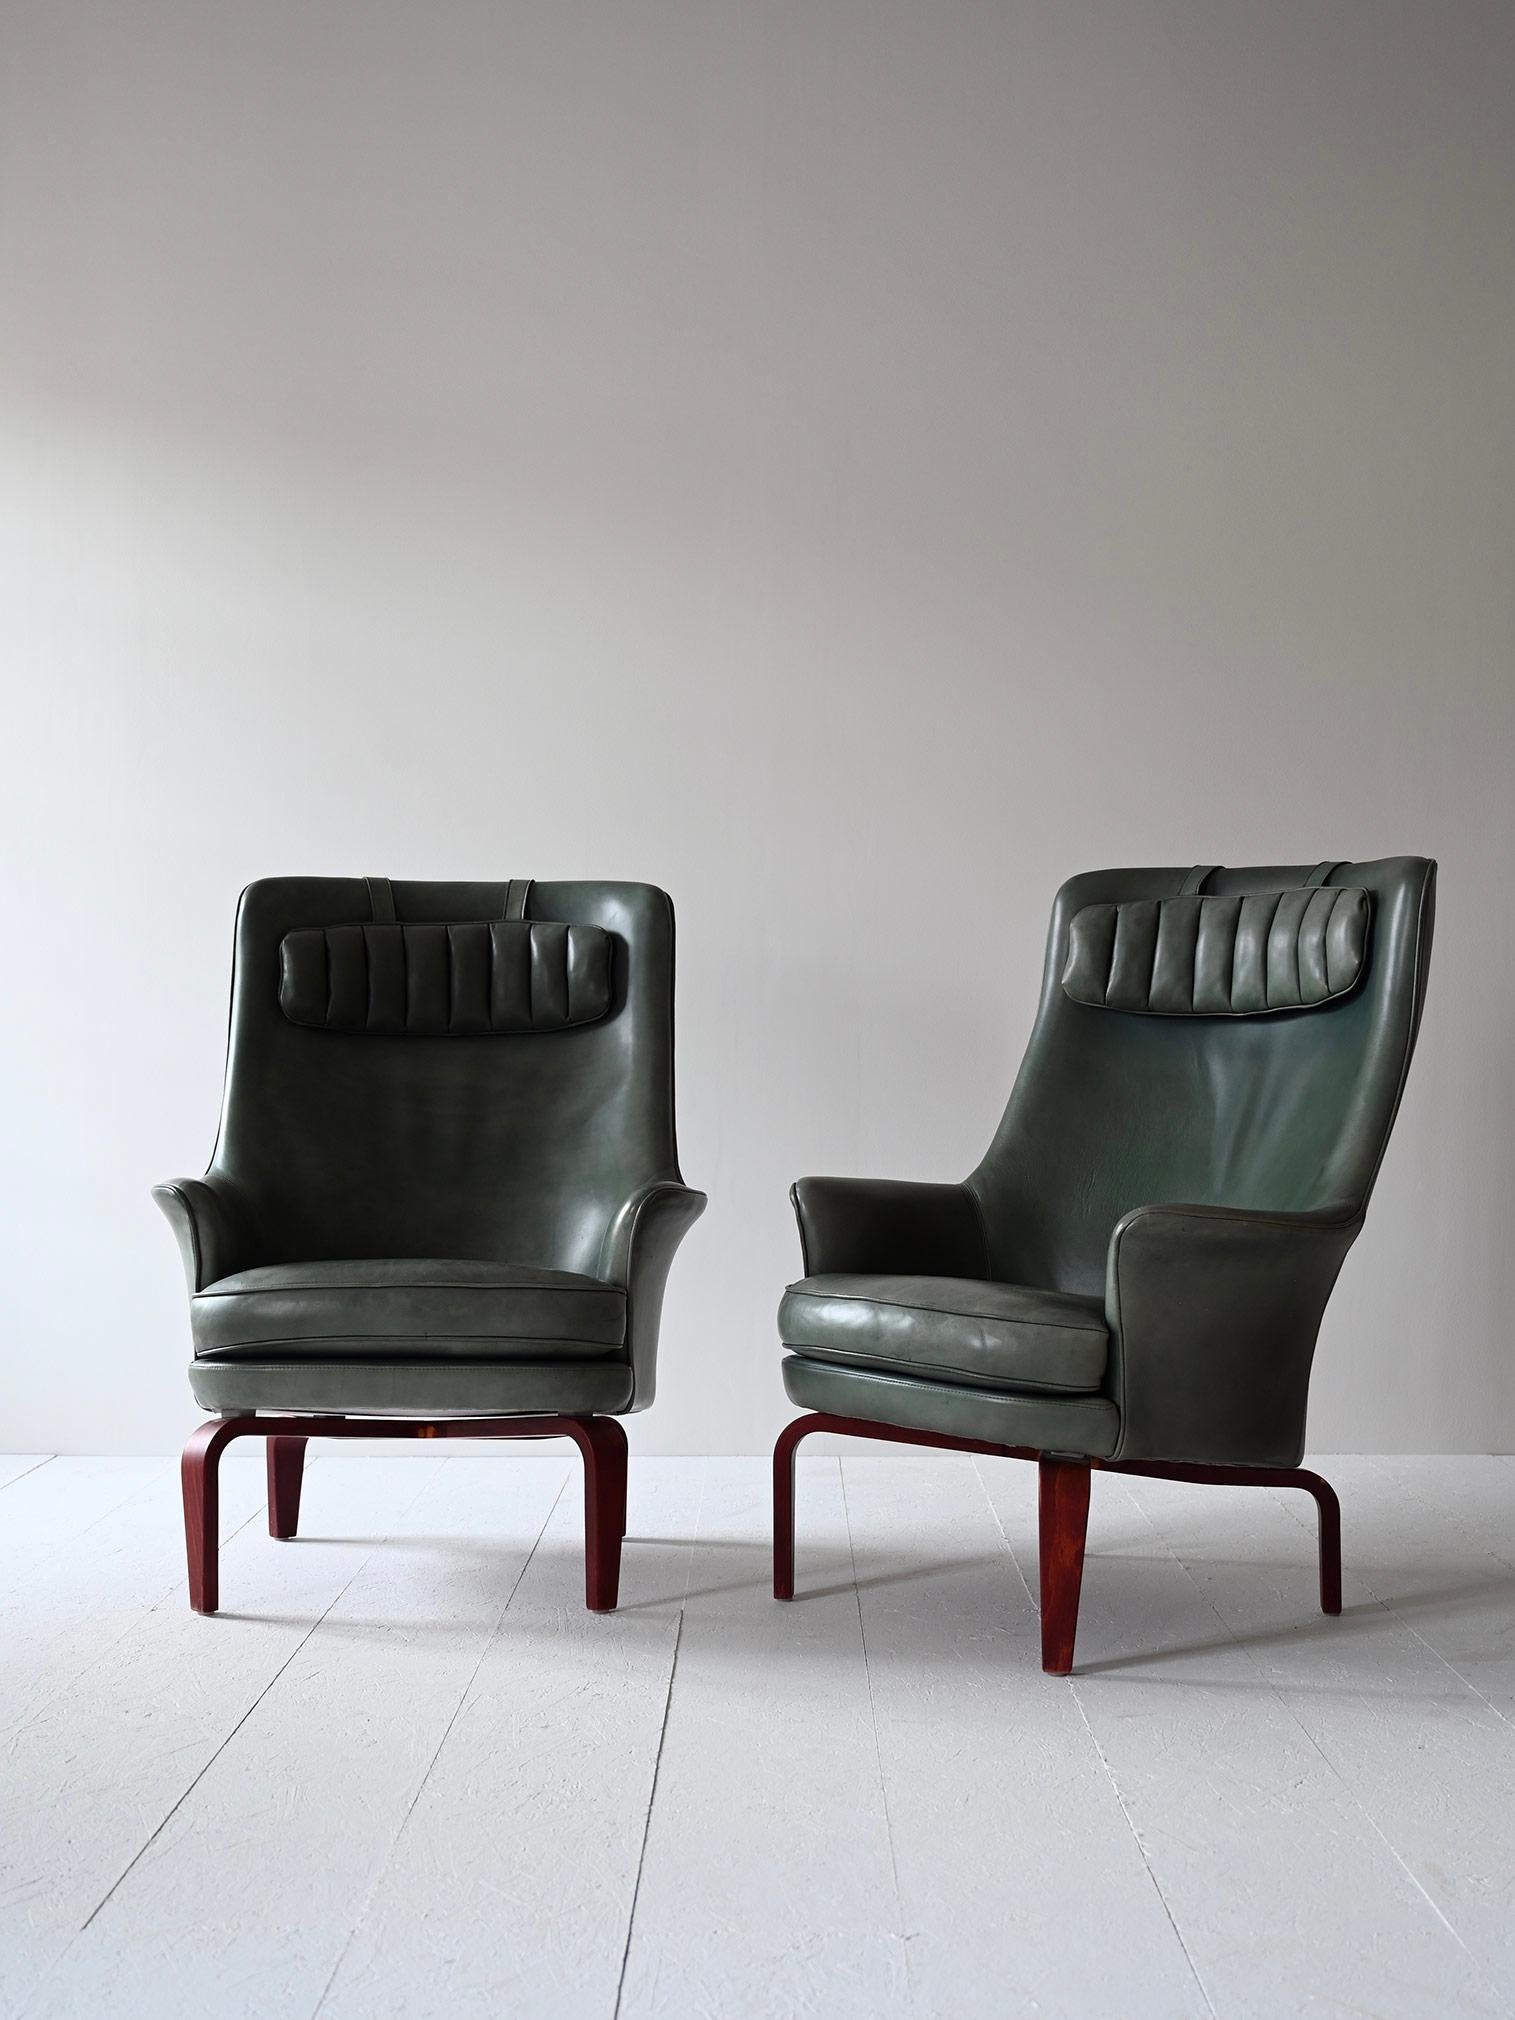 Pair of Pilot model chairs designed by Swedish designer Arne Norell in 1967. 

Consisting of an upholstered frame covered in sage green leather and beechwood legs.
A distinctive feature of these chairs is the slight elevation of the front frame, an